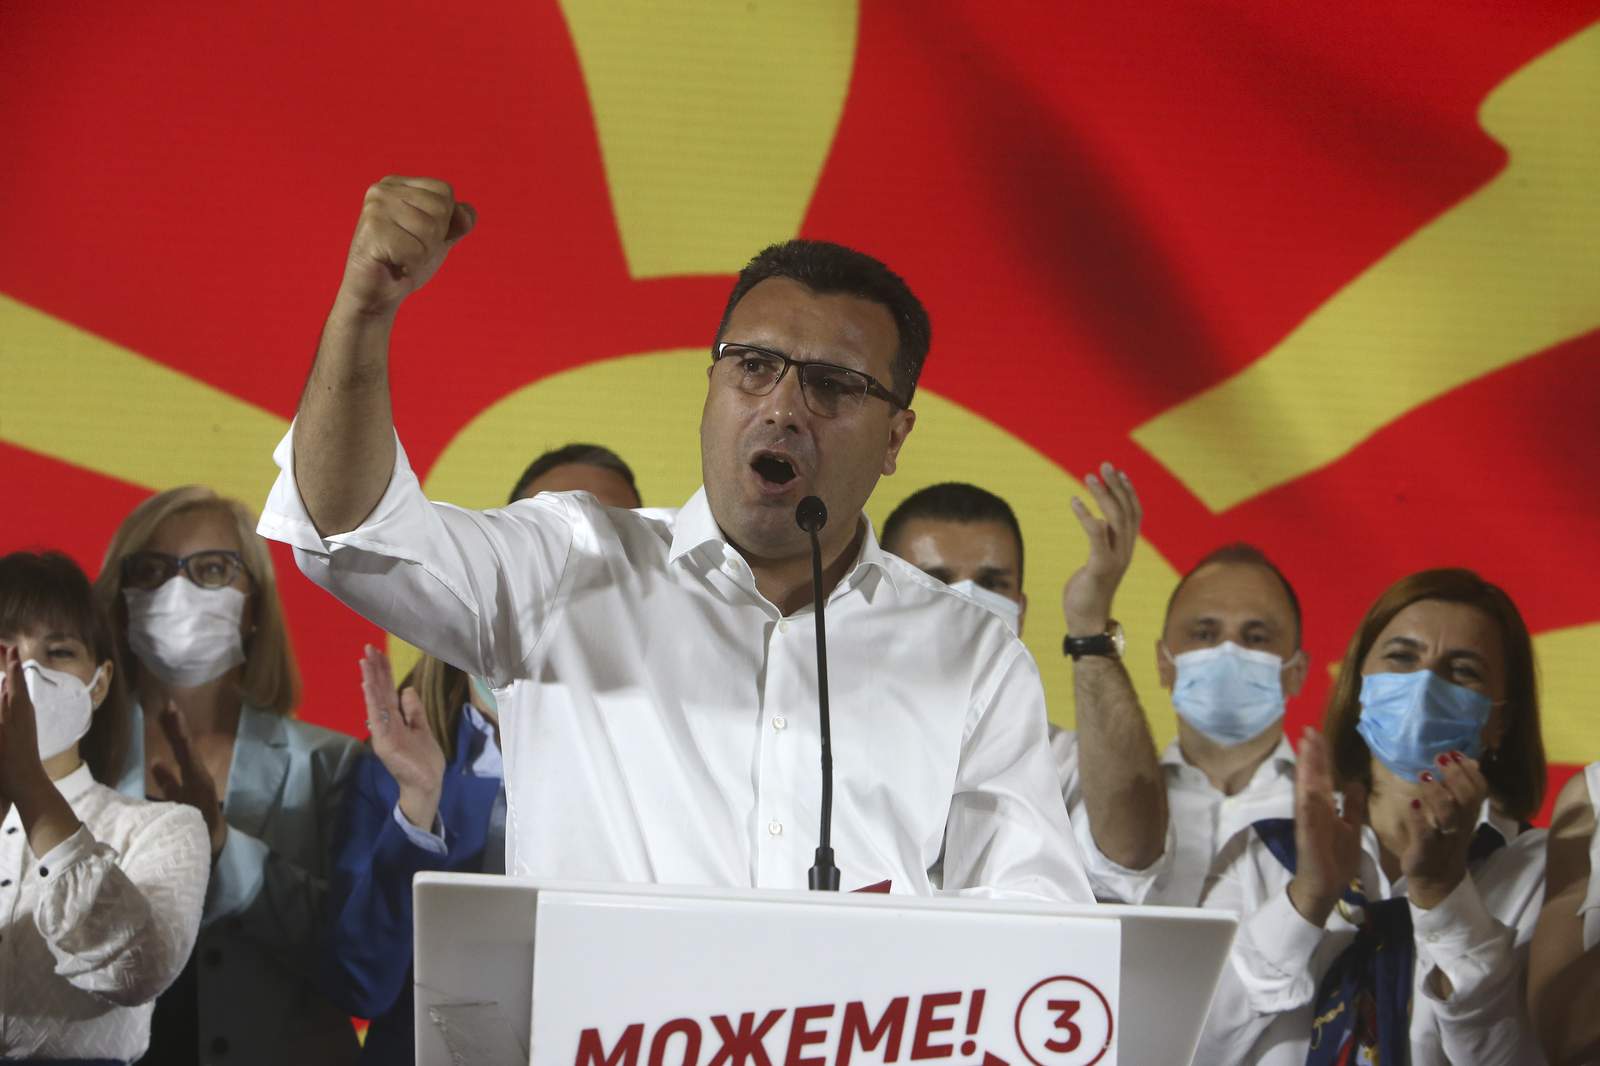 Pro-Western party claims victory in North Macedonia election